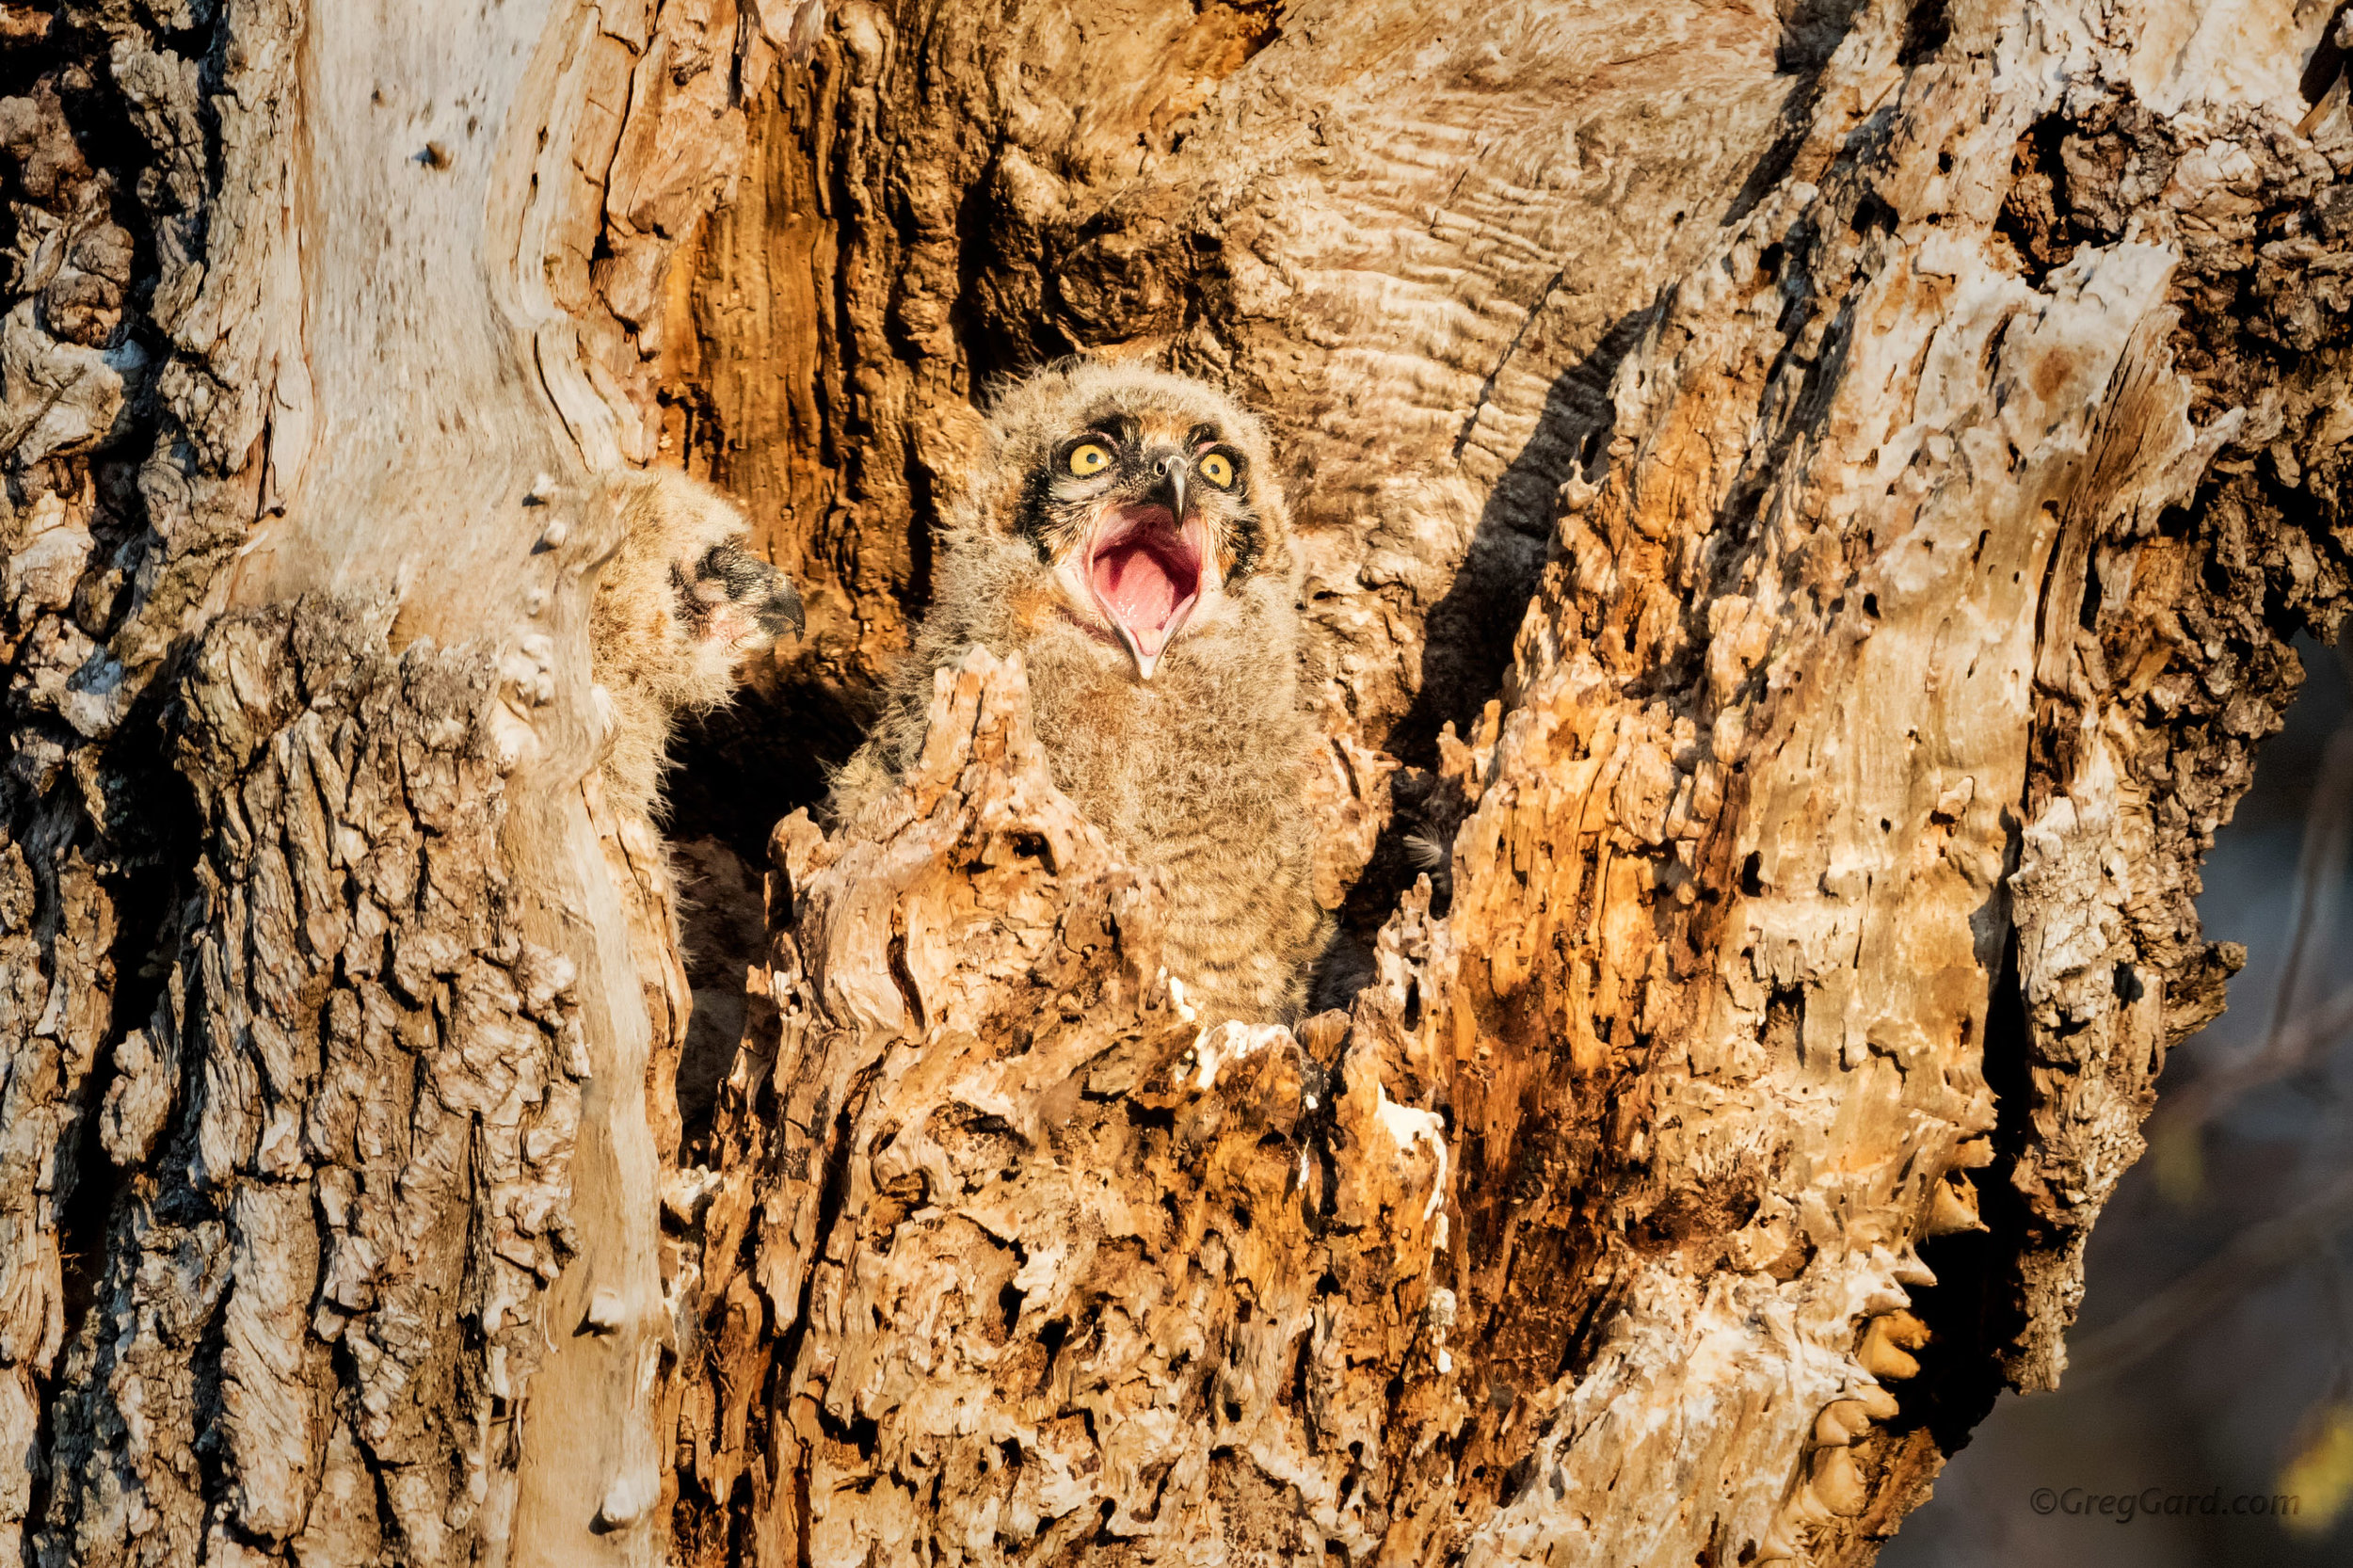 Great Horned Owlet yawning